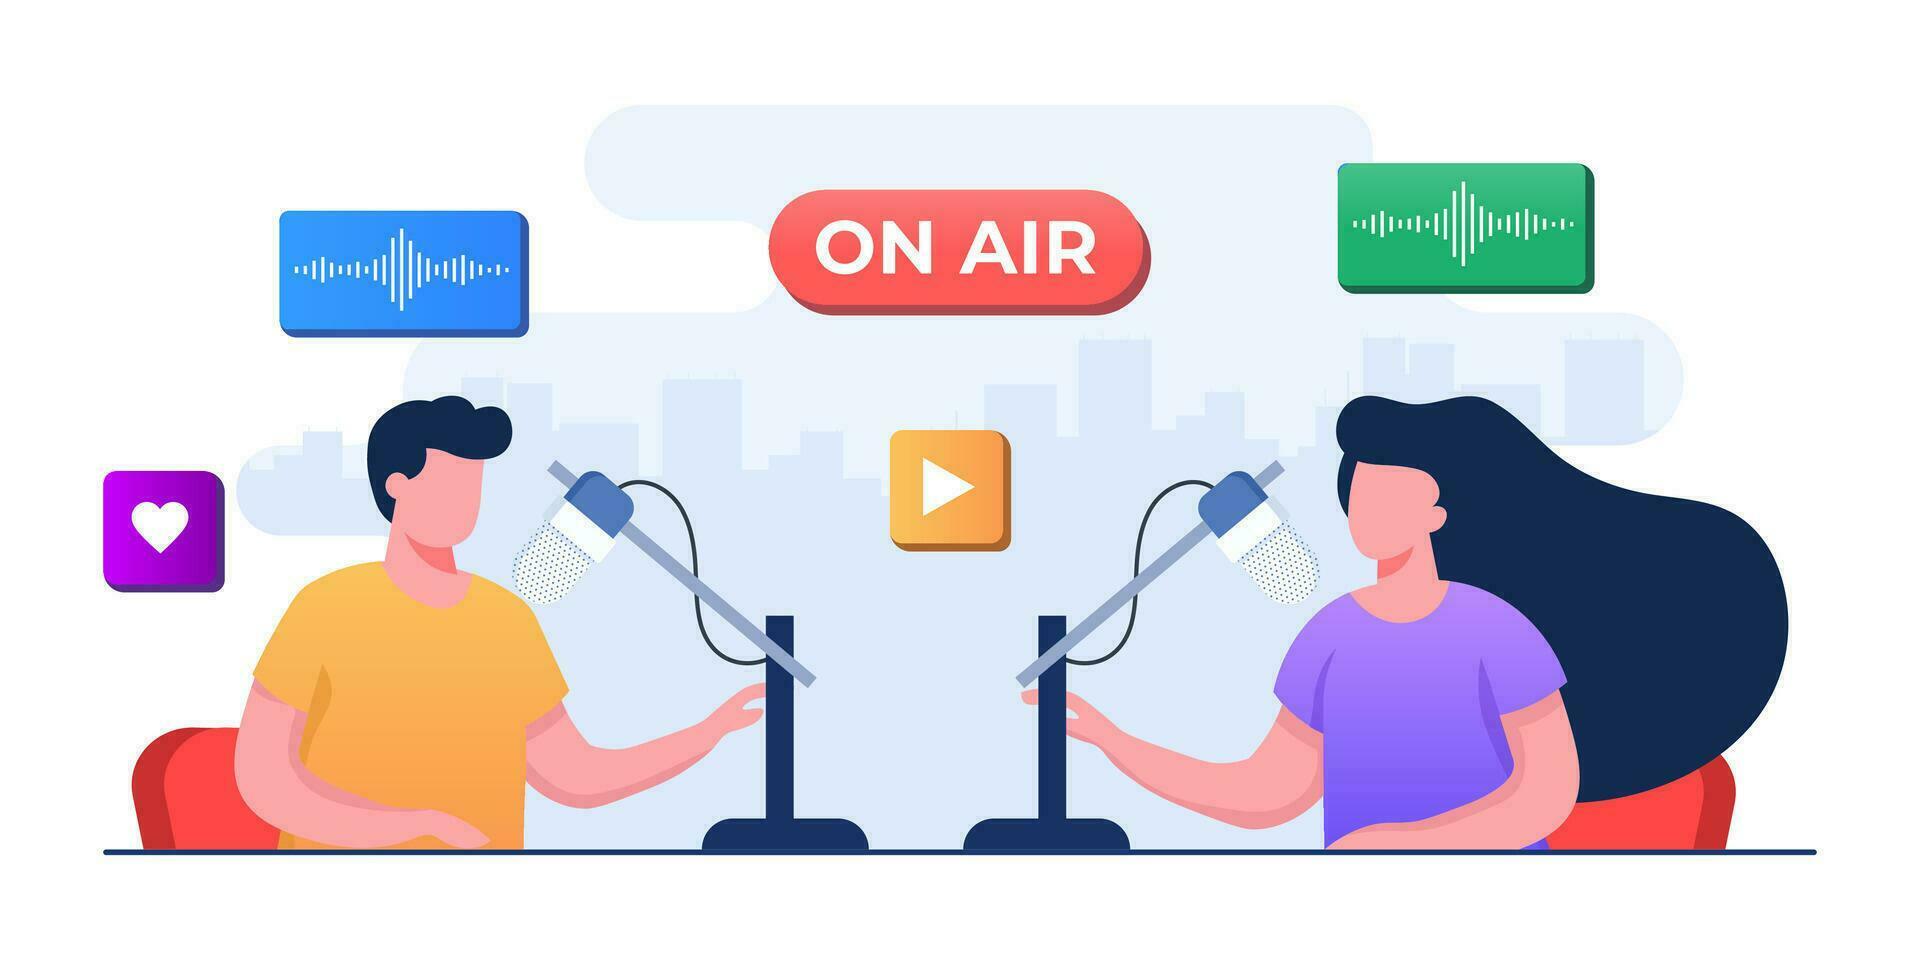 Live broadcast of video or audio podcast on the internet, People talking to microphones and recording podcast, Live online interview concept flat illustration vector template